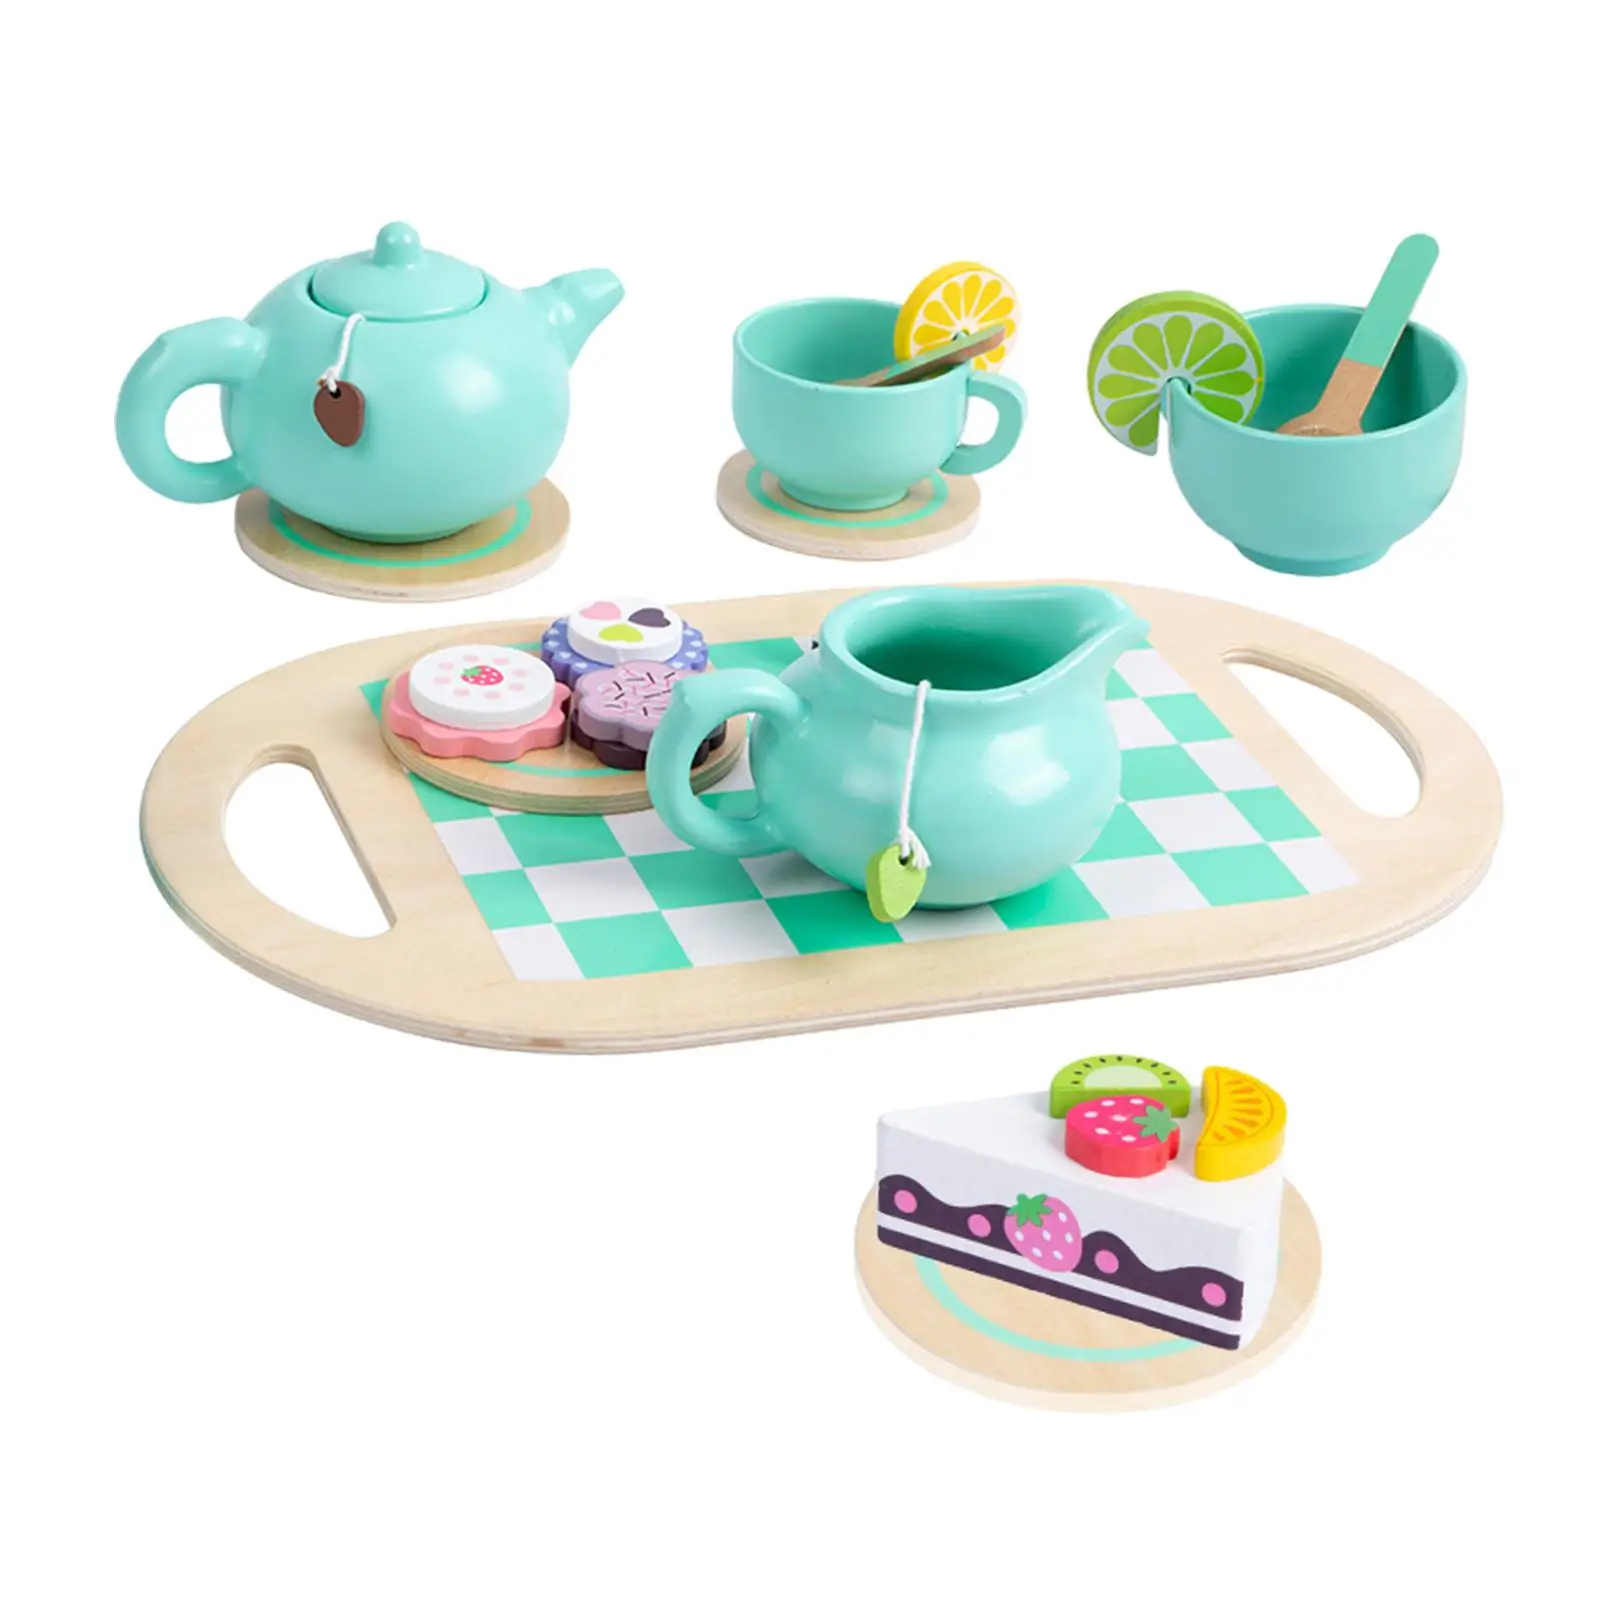 Little Kids Tea Set Toy Kitchen Set Playset Montessori Simulation Realistic Teapot Cups for Ages 3 4 5 Years Old Party Favors